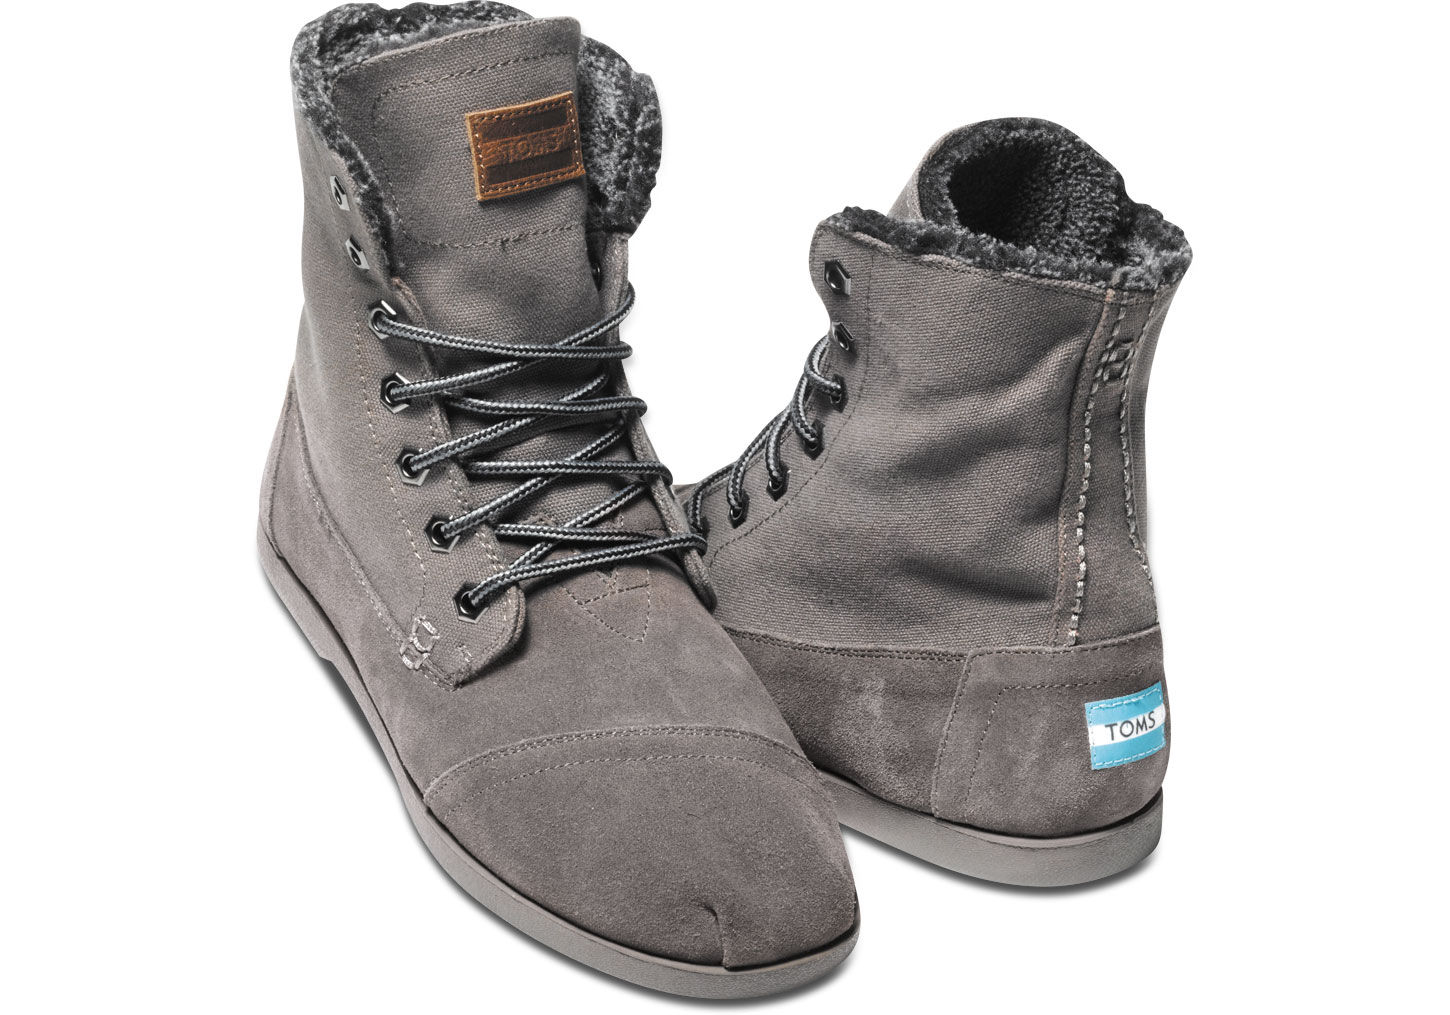 TOMS Ash Canvas Suede Utility Boot in 